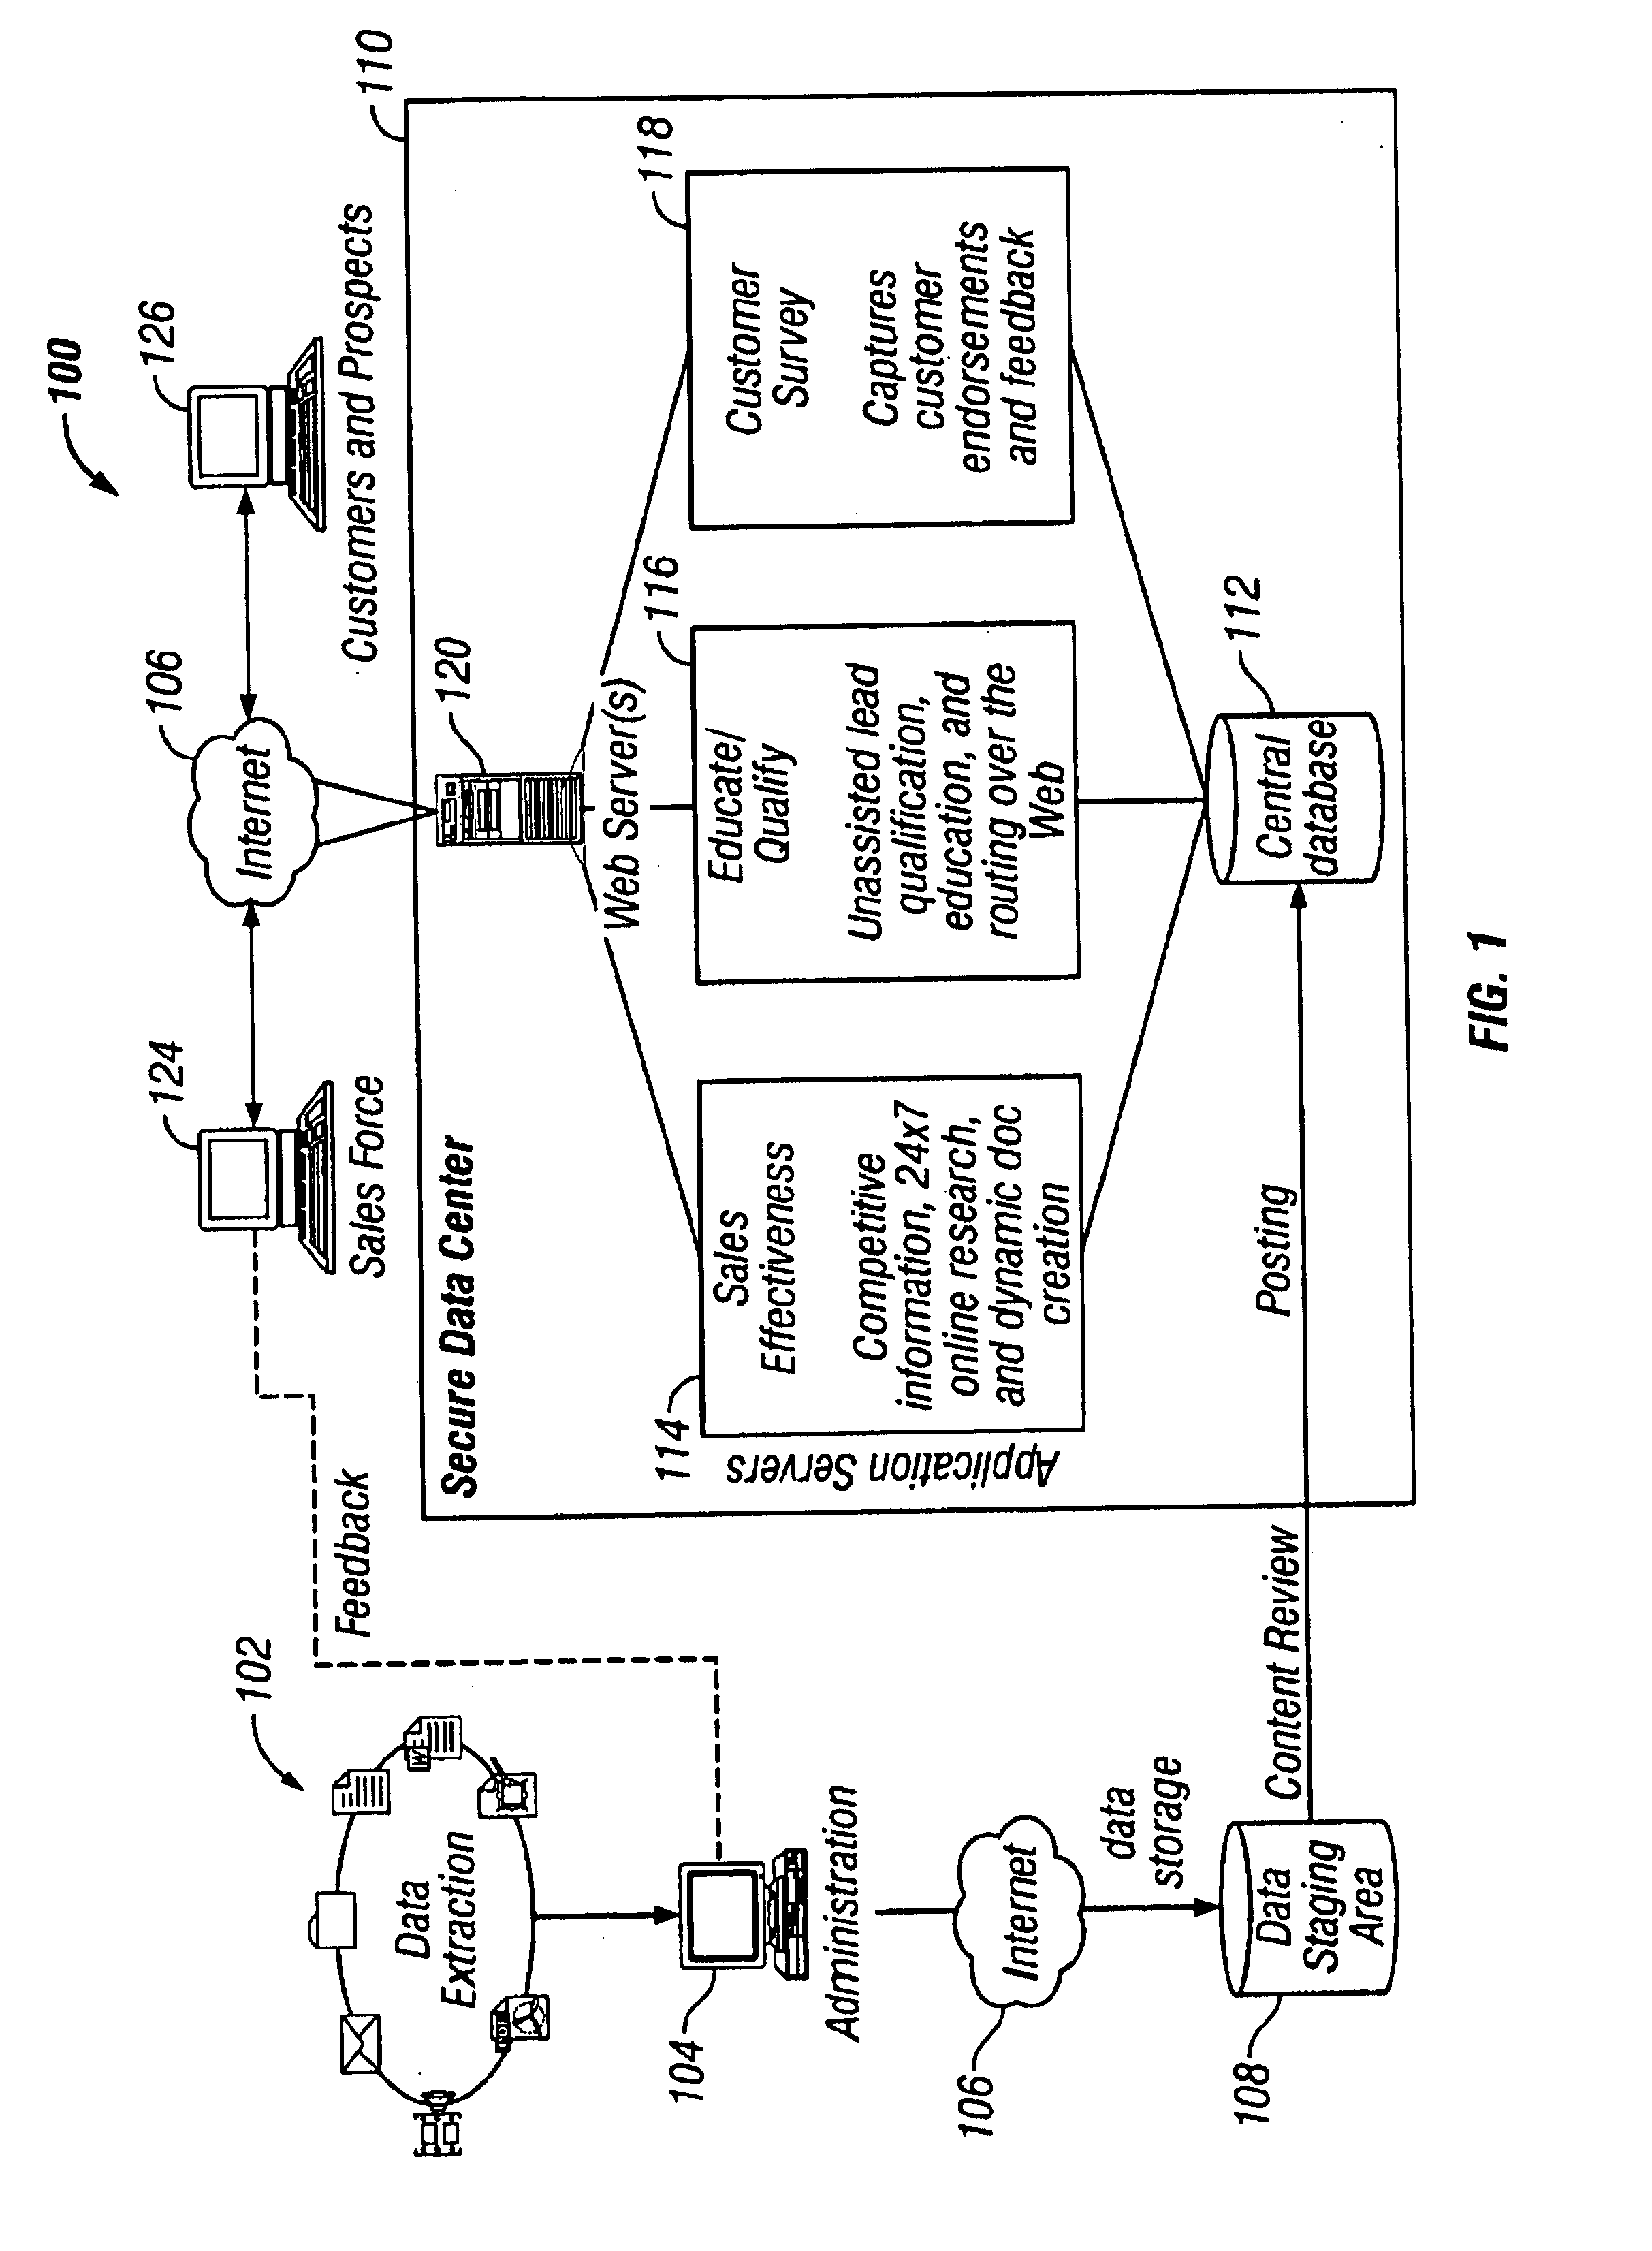 Method and system for managing and providing sales data using world wide web